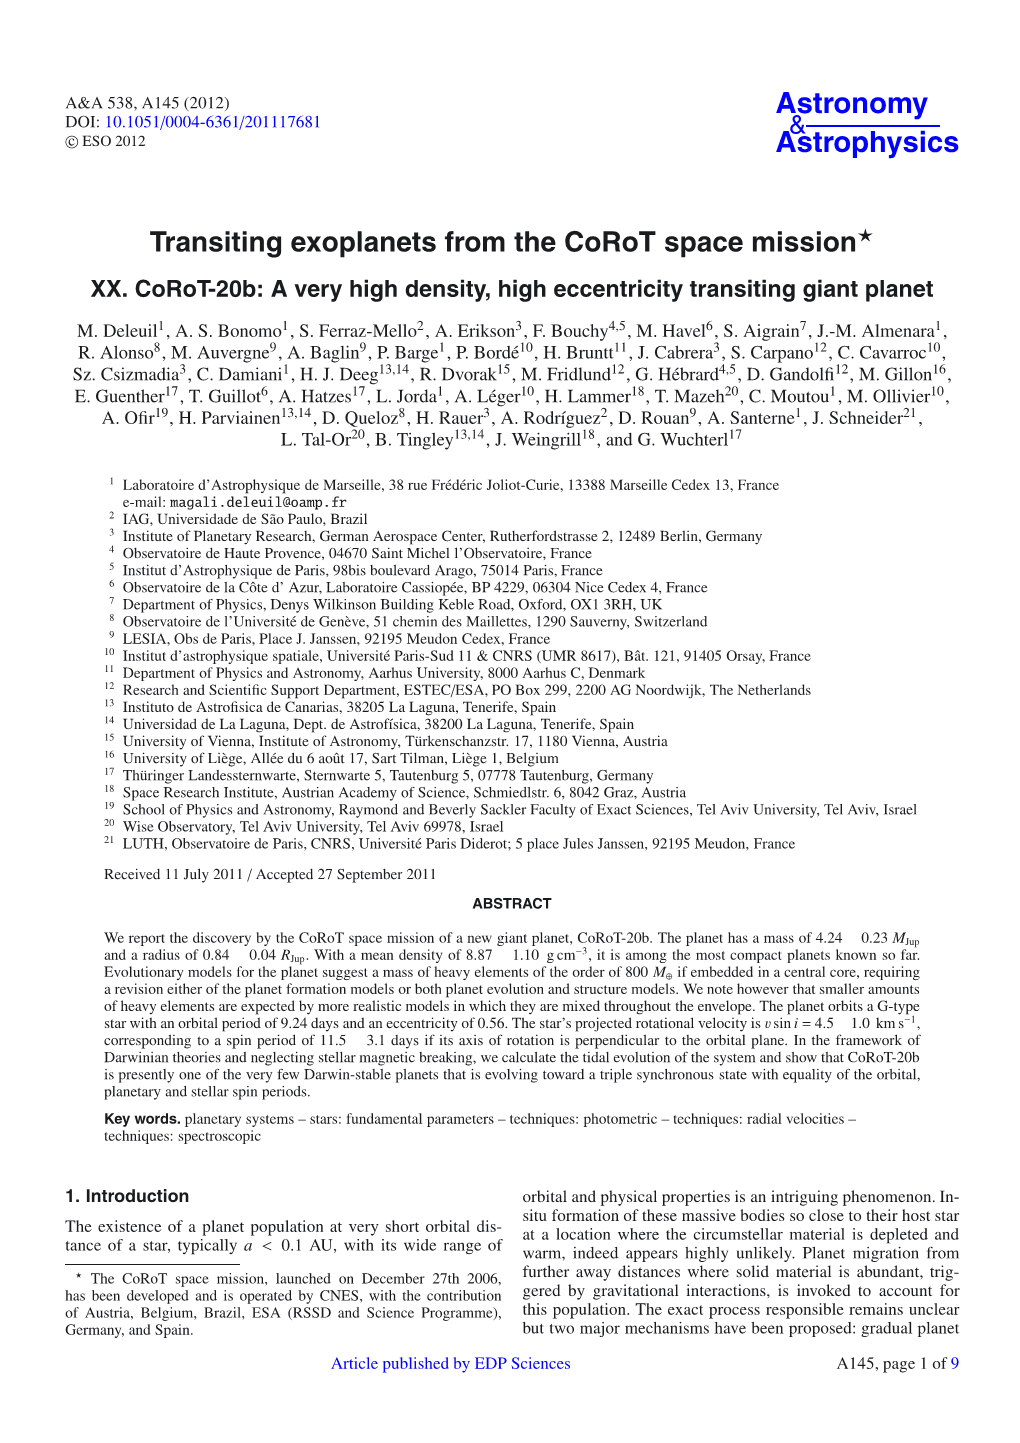 Transiting Exoplanets from the Corot Space Mission⋆